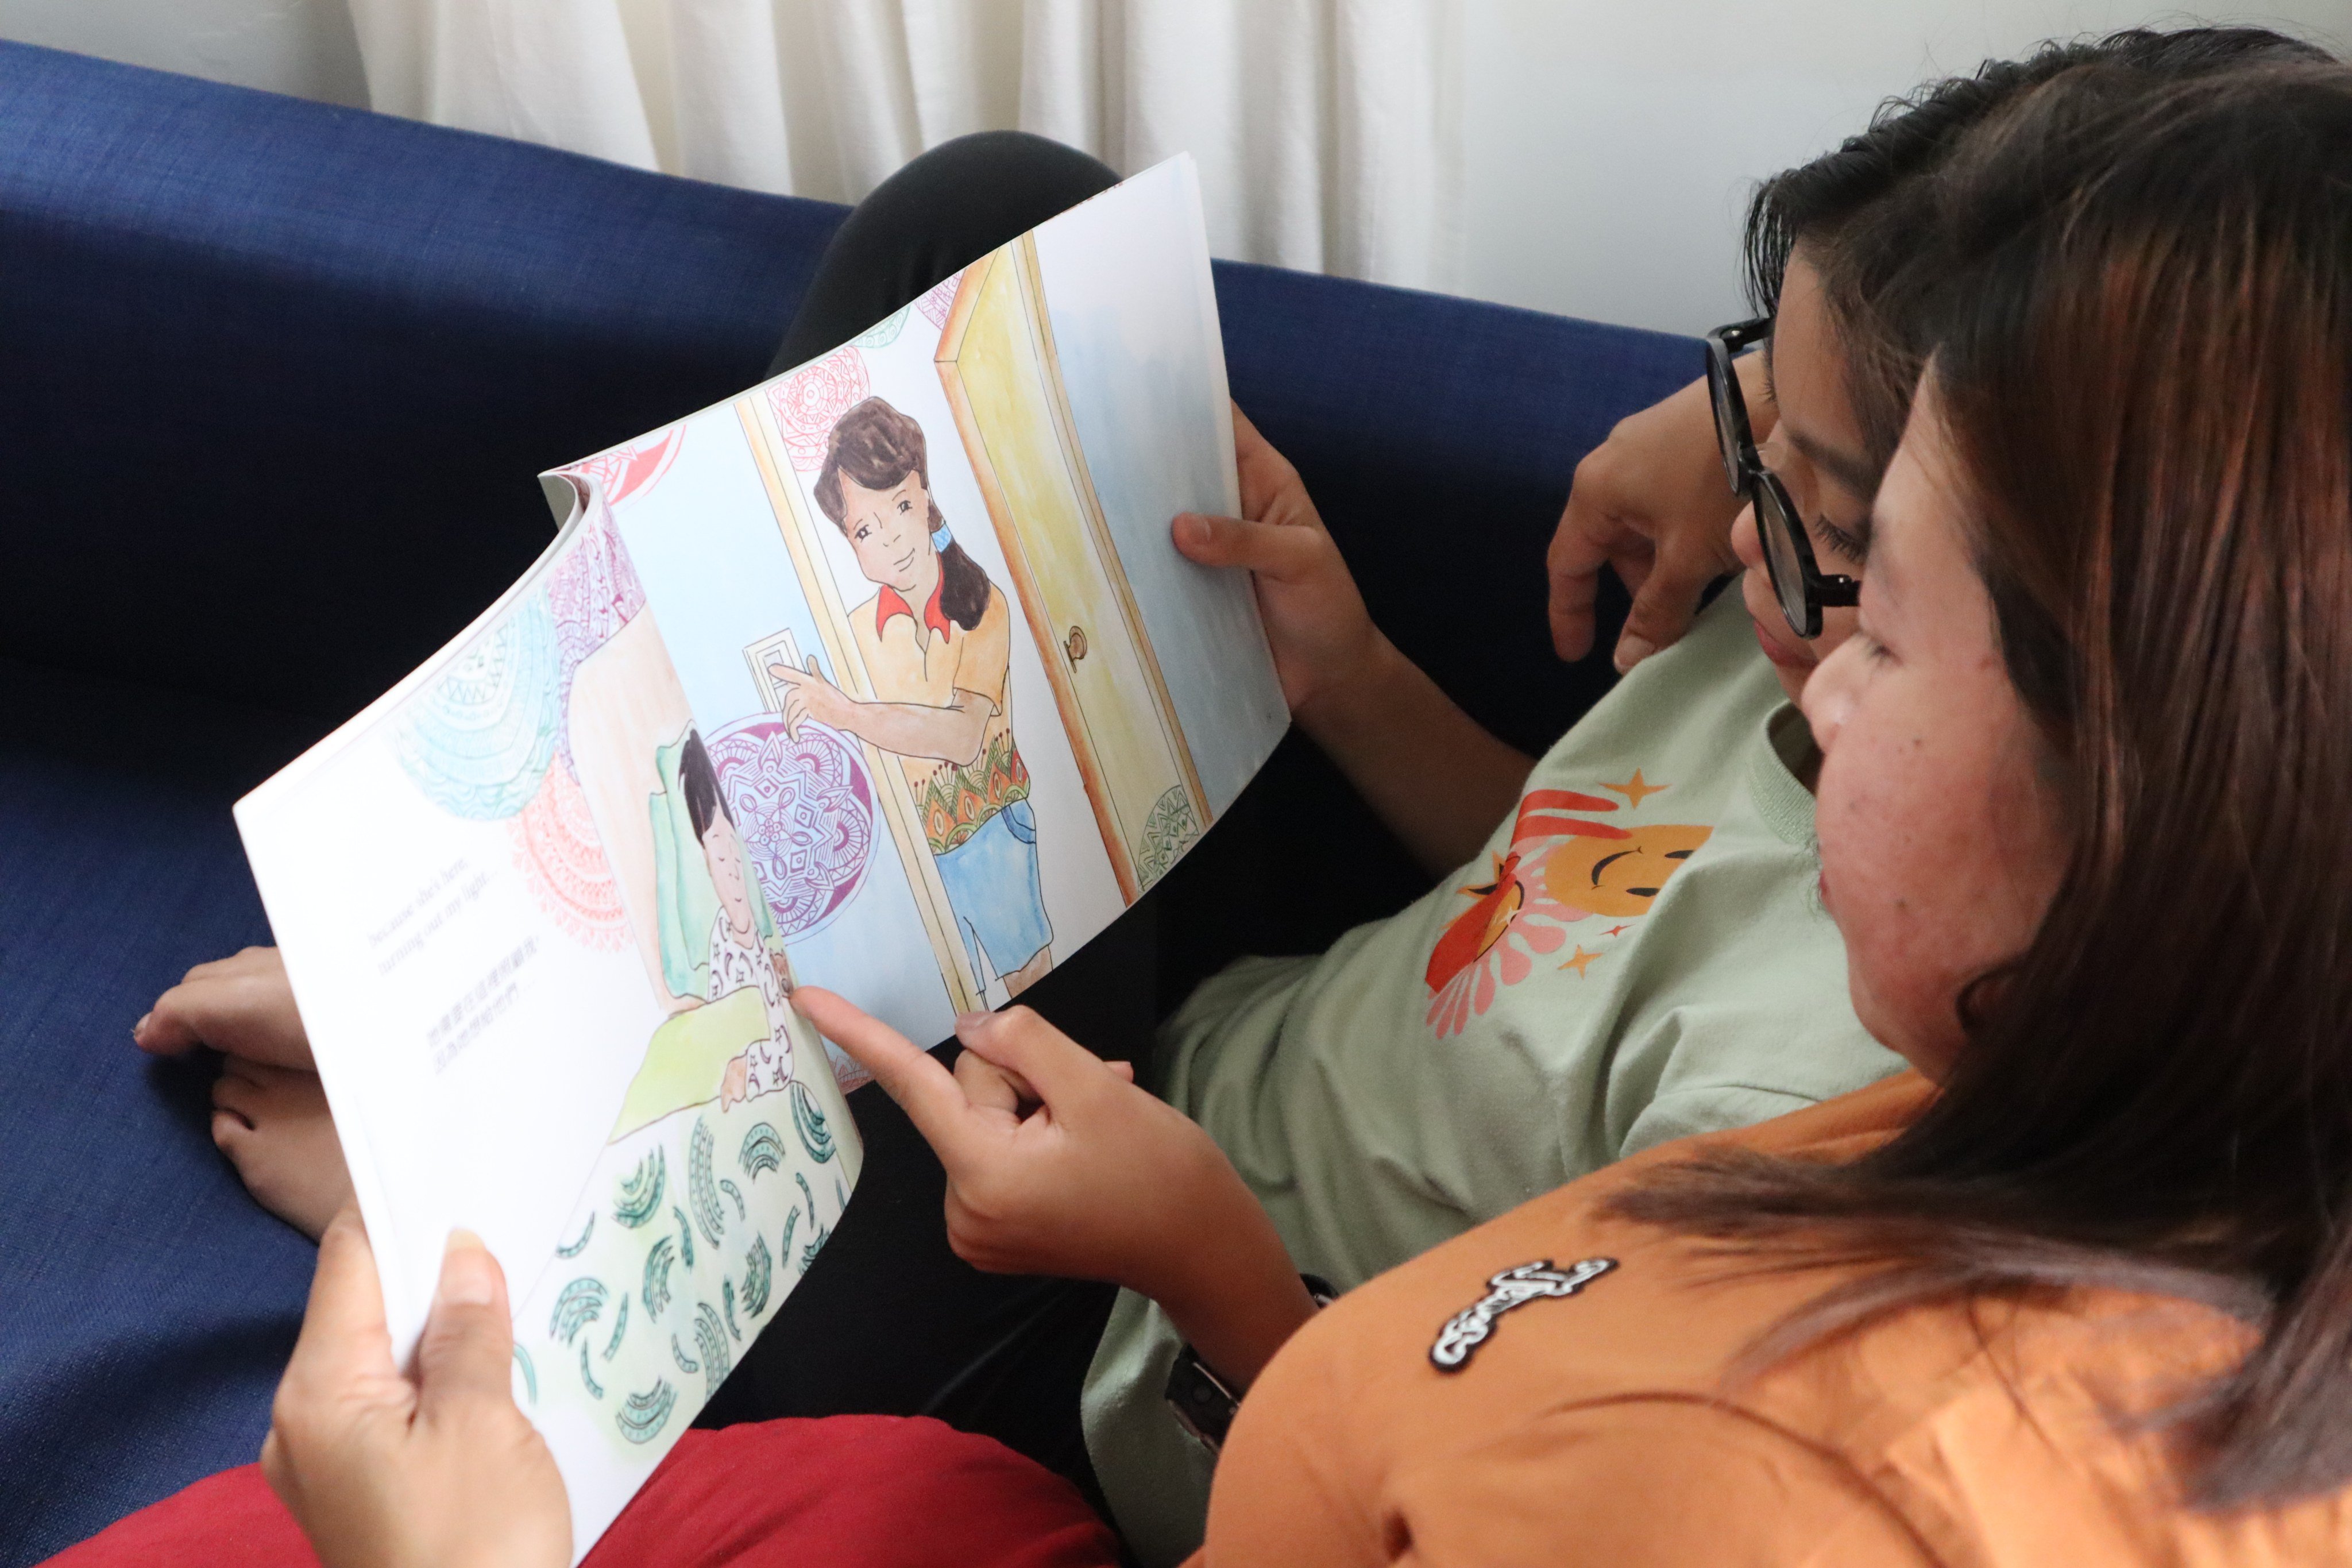 My Extra-Special Aunty is a children’s book illustrated by foreign domestic helpers in Hong Kong that shows the bond between “aunties” and the families they work for. Photo: PathFinders